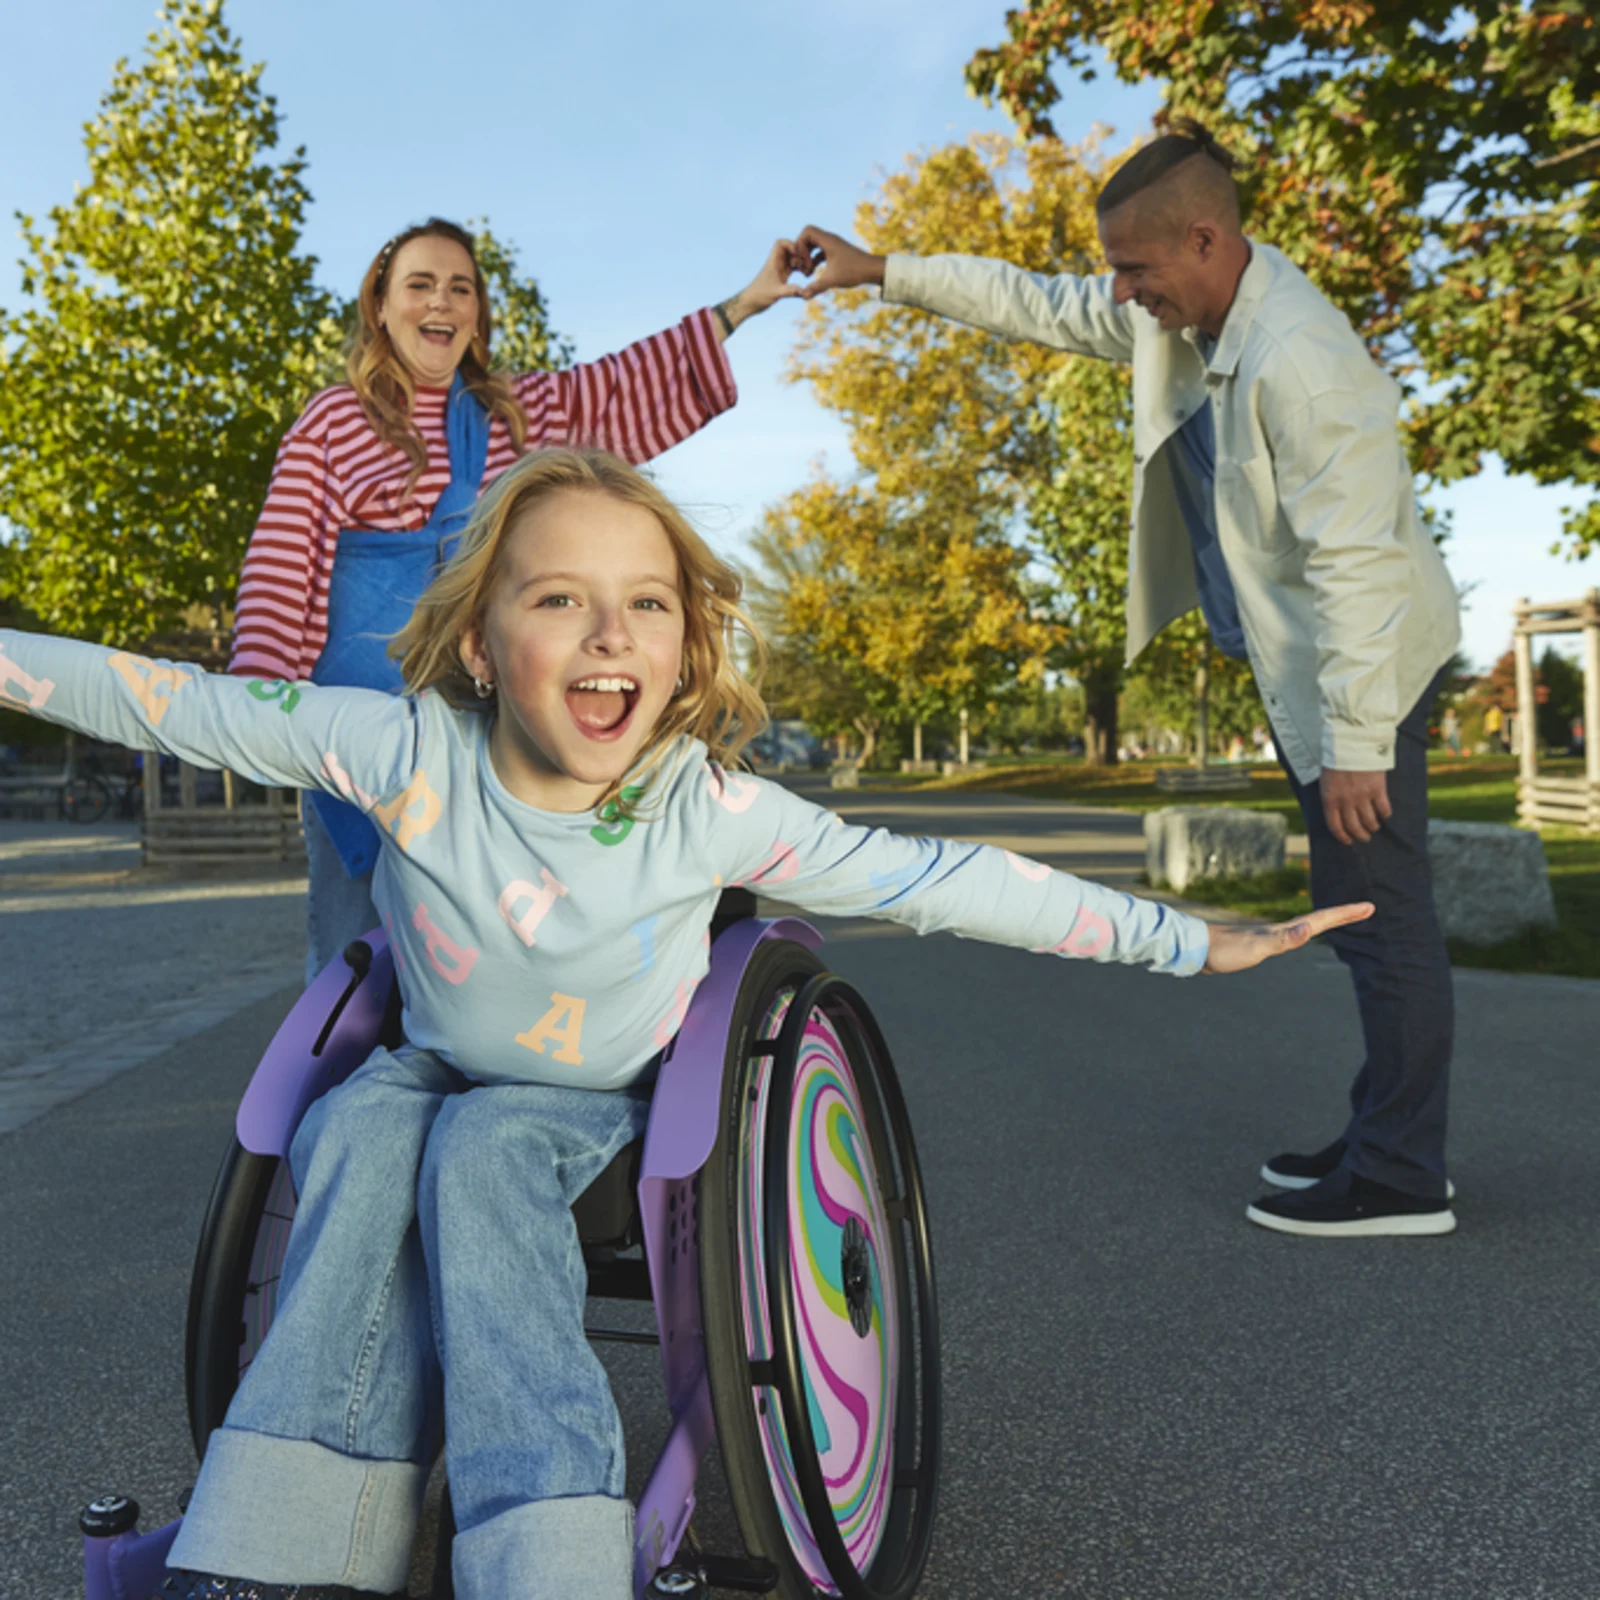 A young girl, Nomine, leans forward in her Kiddo wheelchair with her arms reaching out to the side, smiling as her parents’s stand behind her, hands joined to create a heart shape.